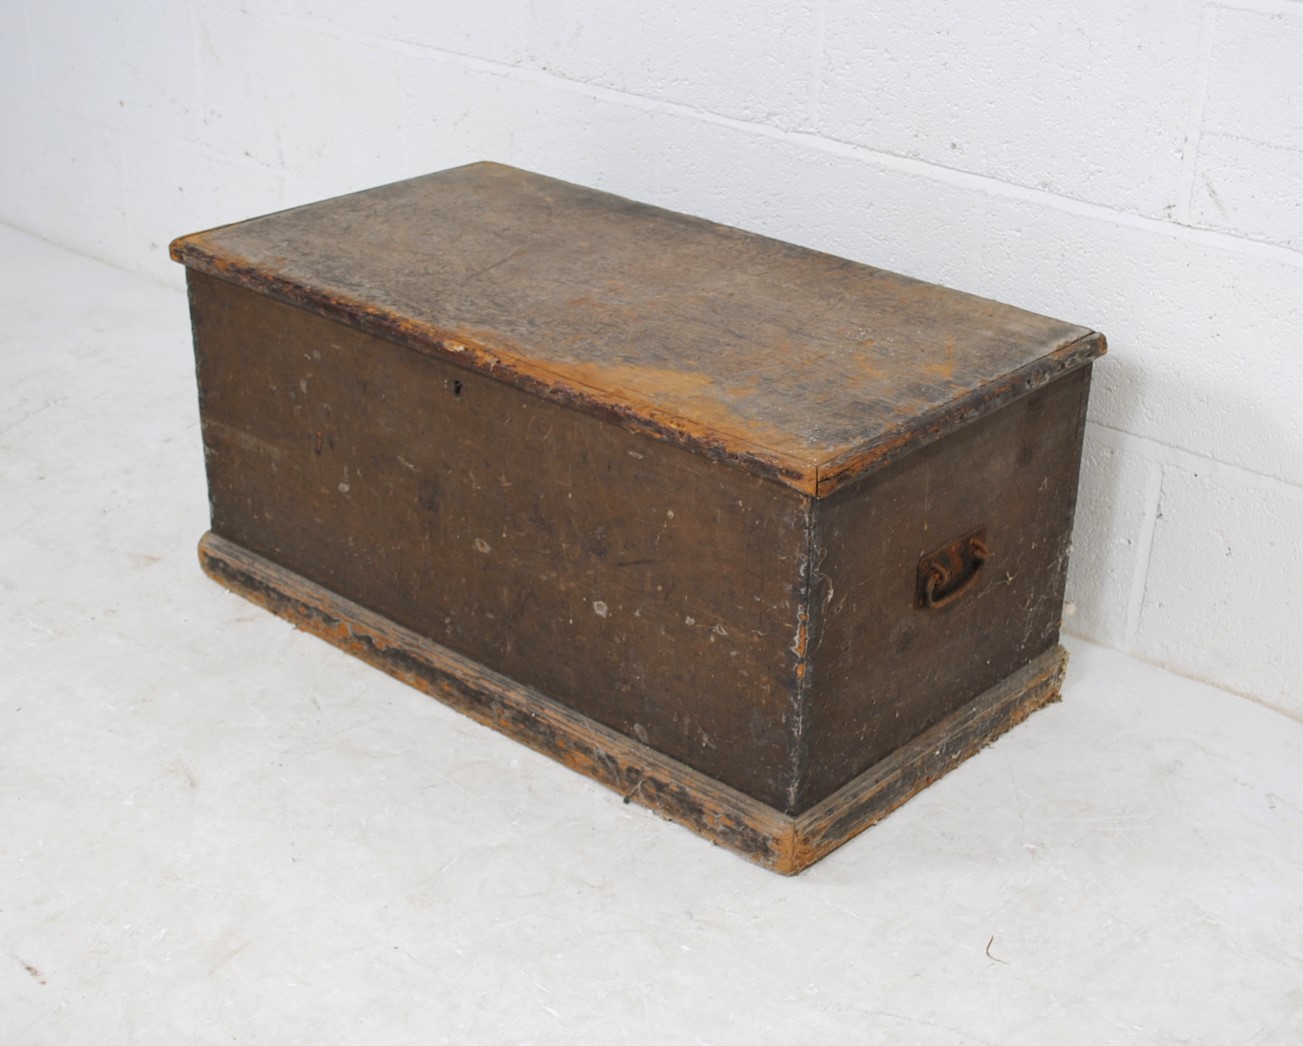 An antique stained pine trunk, with wrought iron handles - length 85.5cm, depth 44.5cm, height 39cm - Image 2 of 6